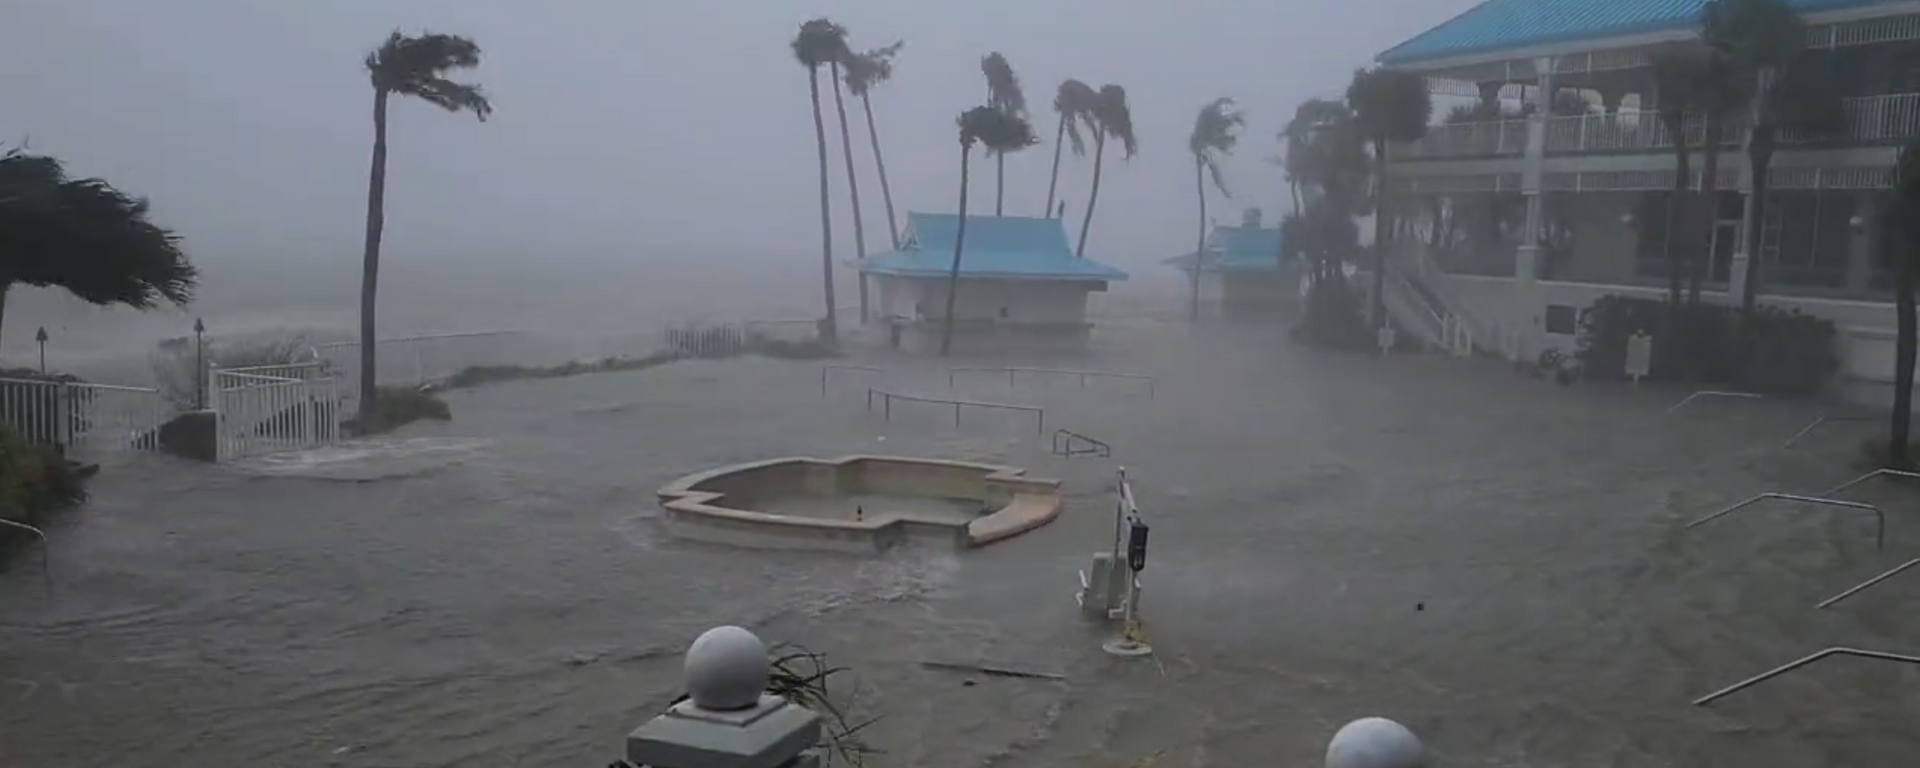 Hurricane Ian has officially made landfall in Florida as a Category 4 storm, the US National Hurricane Center has confirmed. - Sputnik International, 1920, 17.11.2023